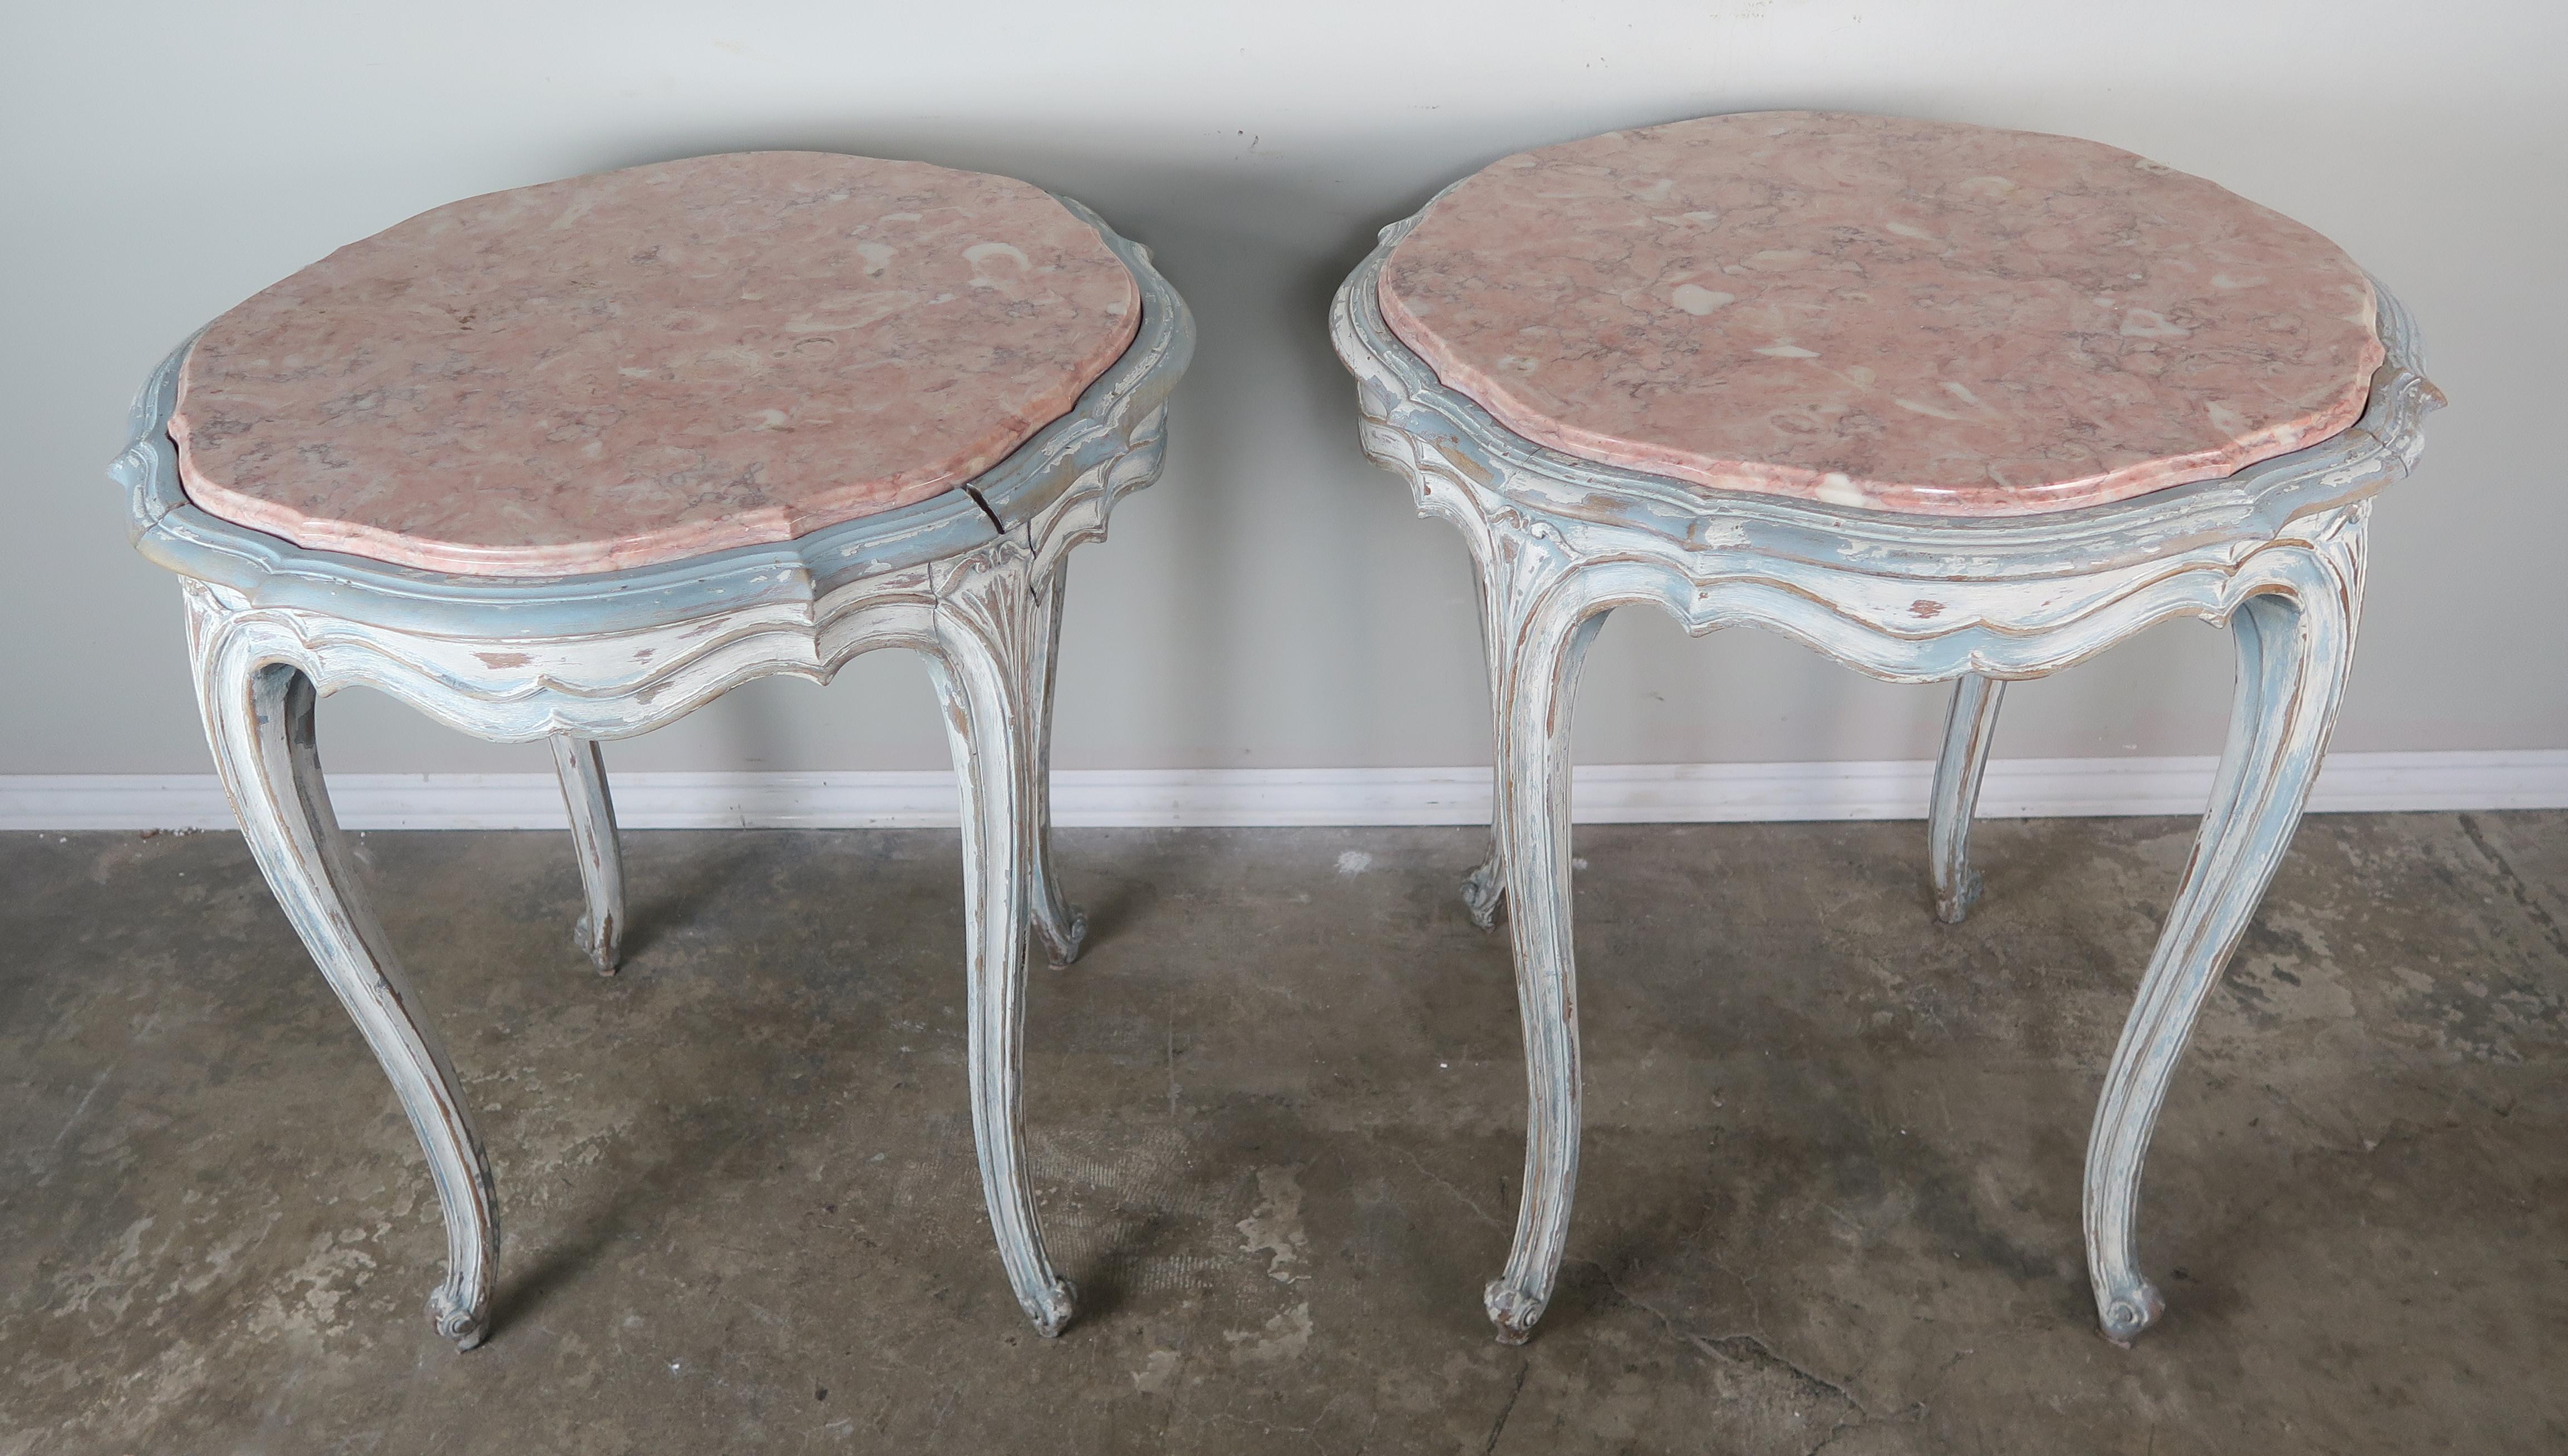 Pair of French cream and soft blue painted Louis XV style side table with inset marble tops.
 